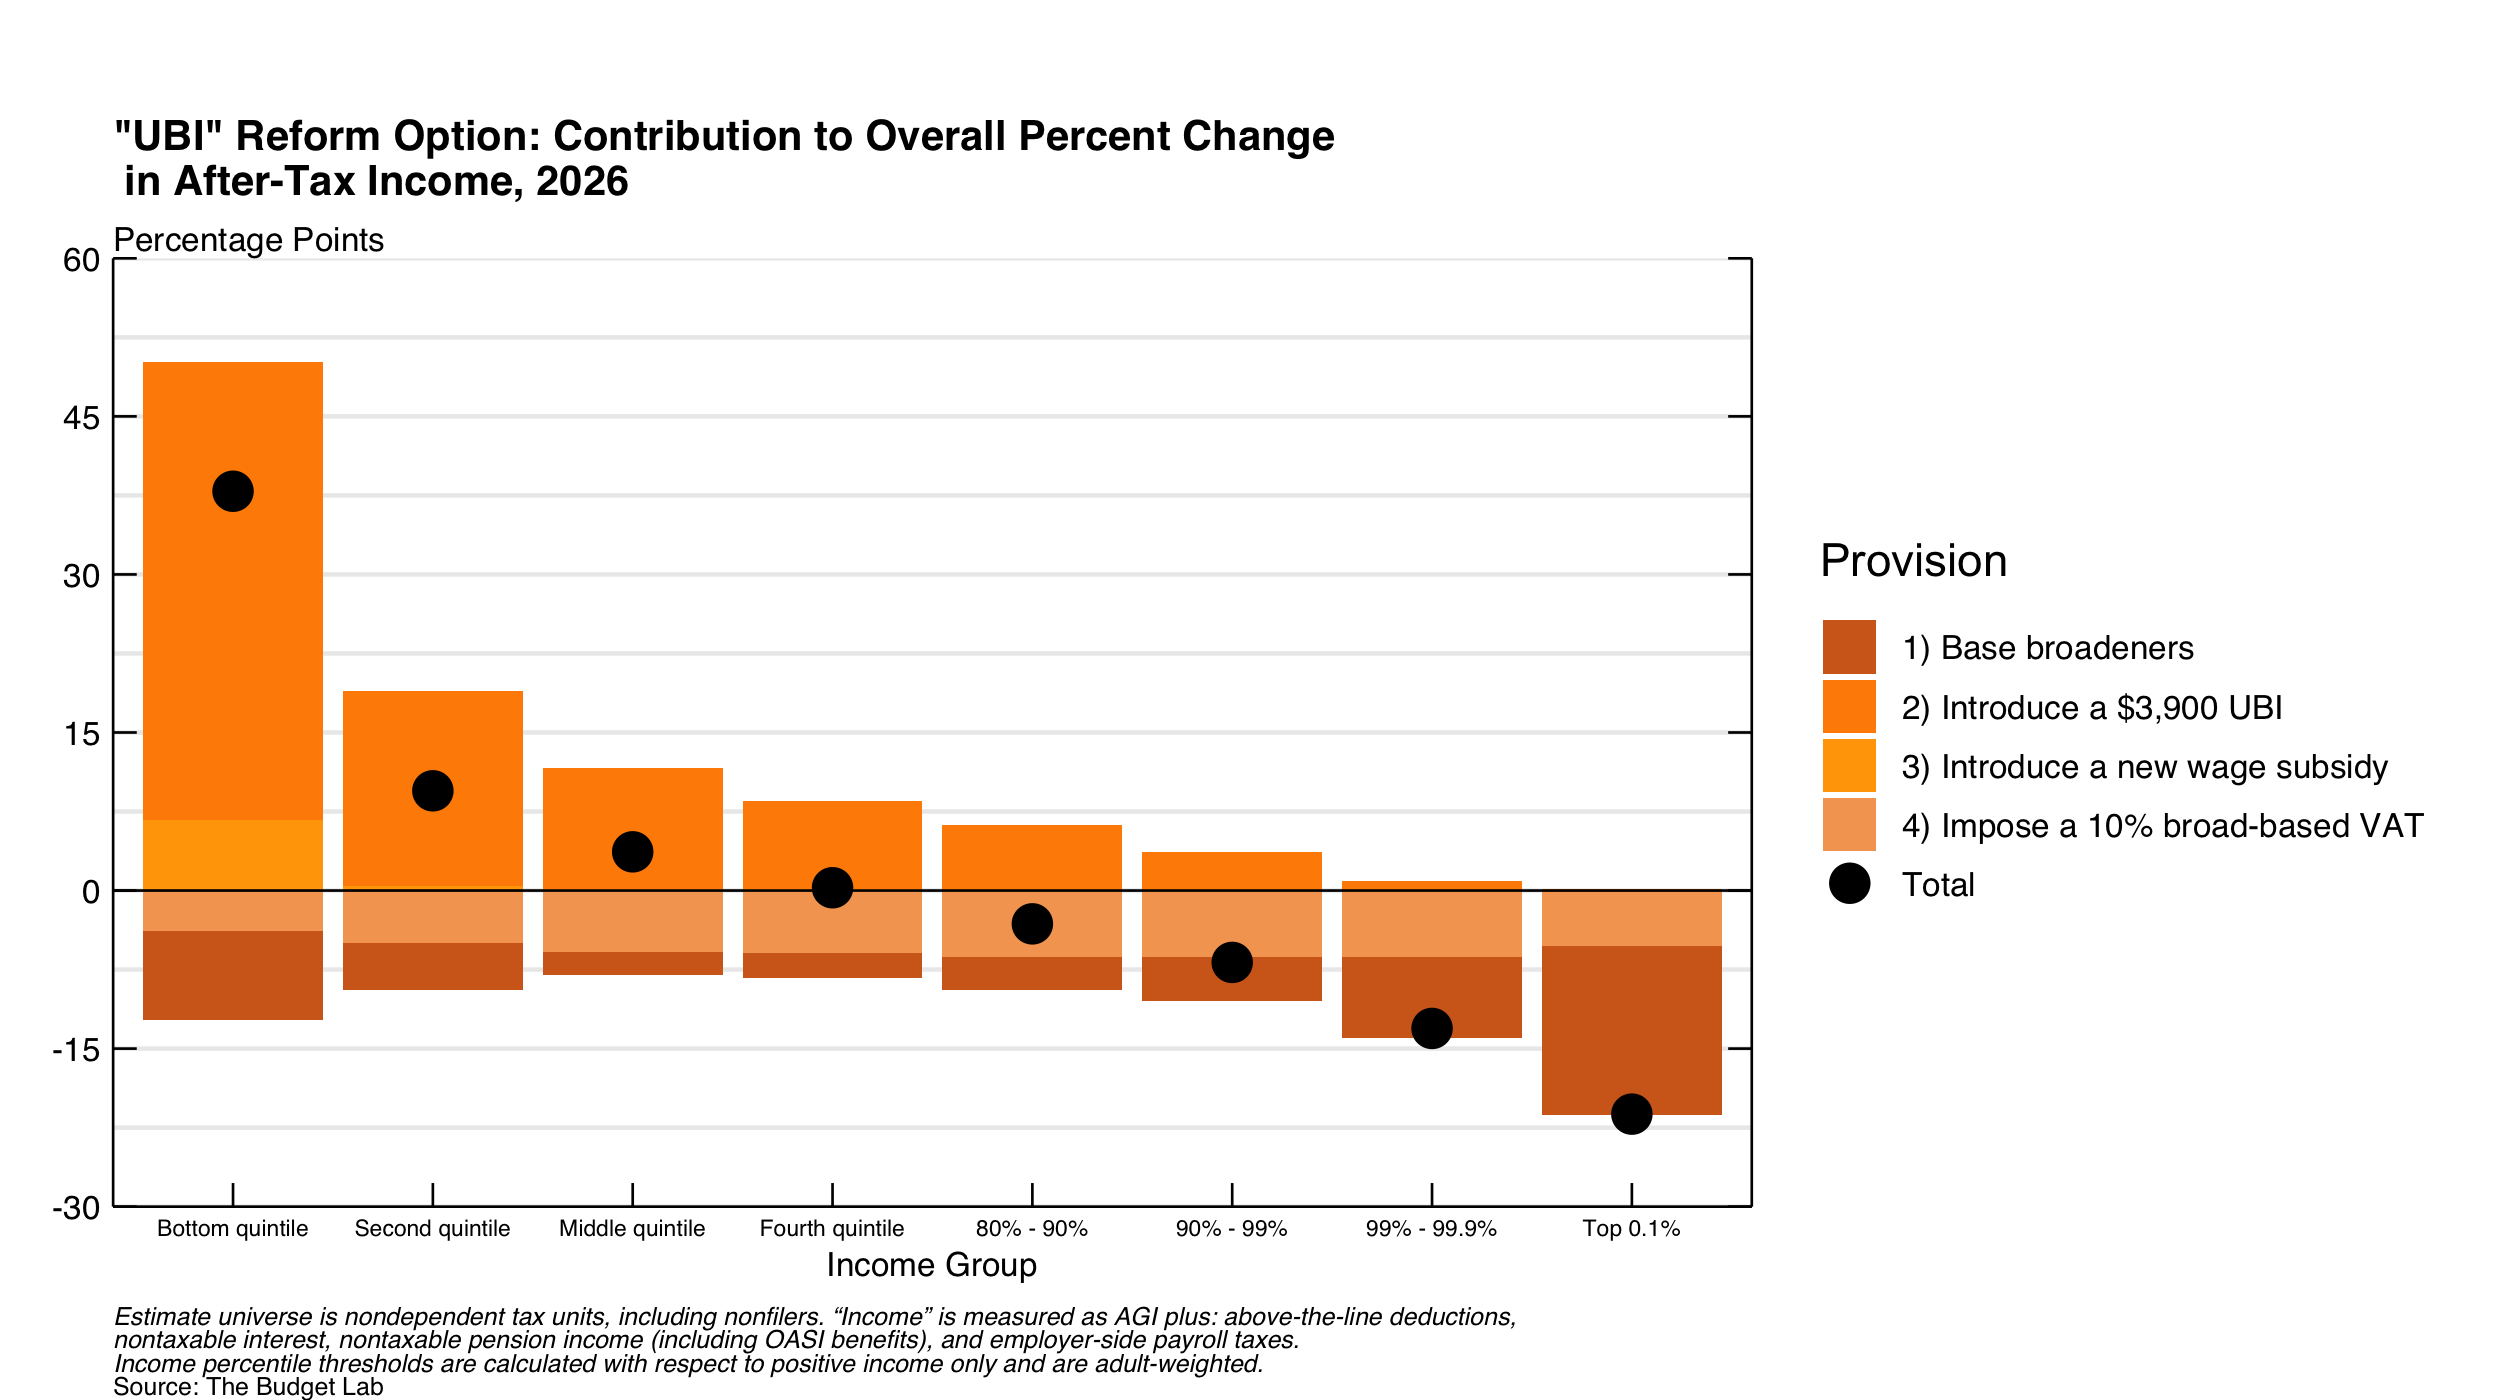 “UBI” Reform Option: Contribution to Overall Percent Change in After-Tax Income, 2026